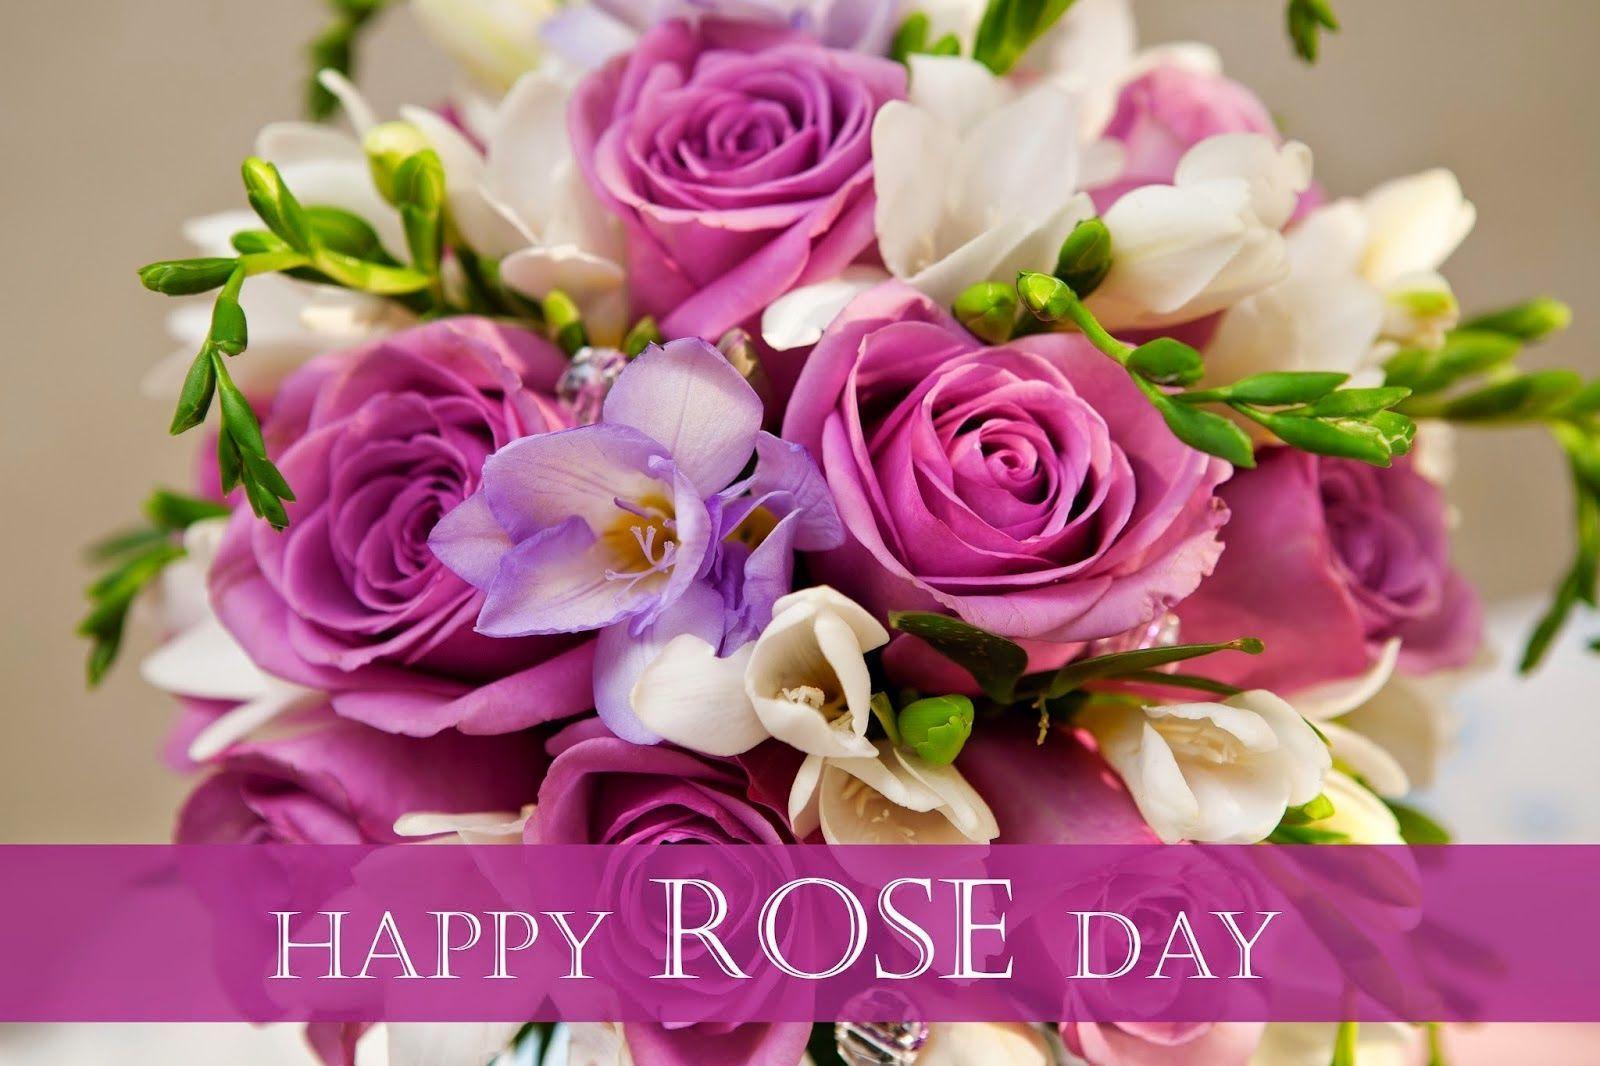 Happy Rose Day Quotes Sms Image Wallpaper 2017